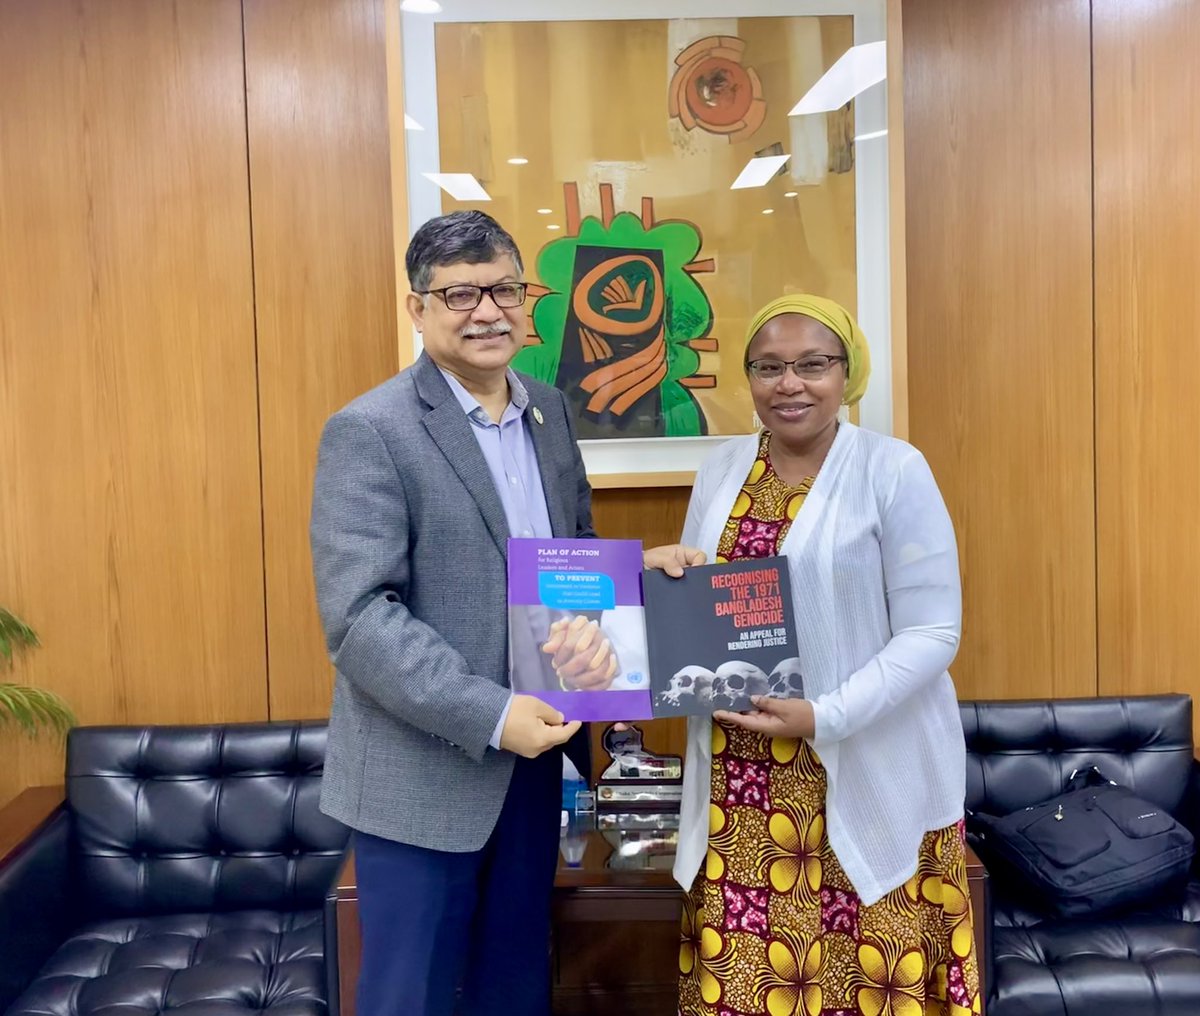 Met Ms. Alice Wairimu Nderitu, UN Under-Secretary-General and Special Adviser on the Prevention of Genocide a while ago. Had fruitful discussion on attaining due international recognition of the Genocide of 1971 and also the Genocide that took place in Rakhaine in 2017.